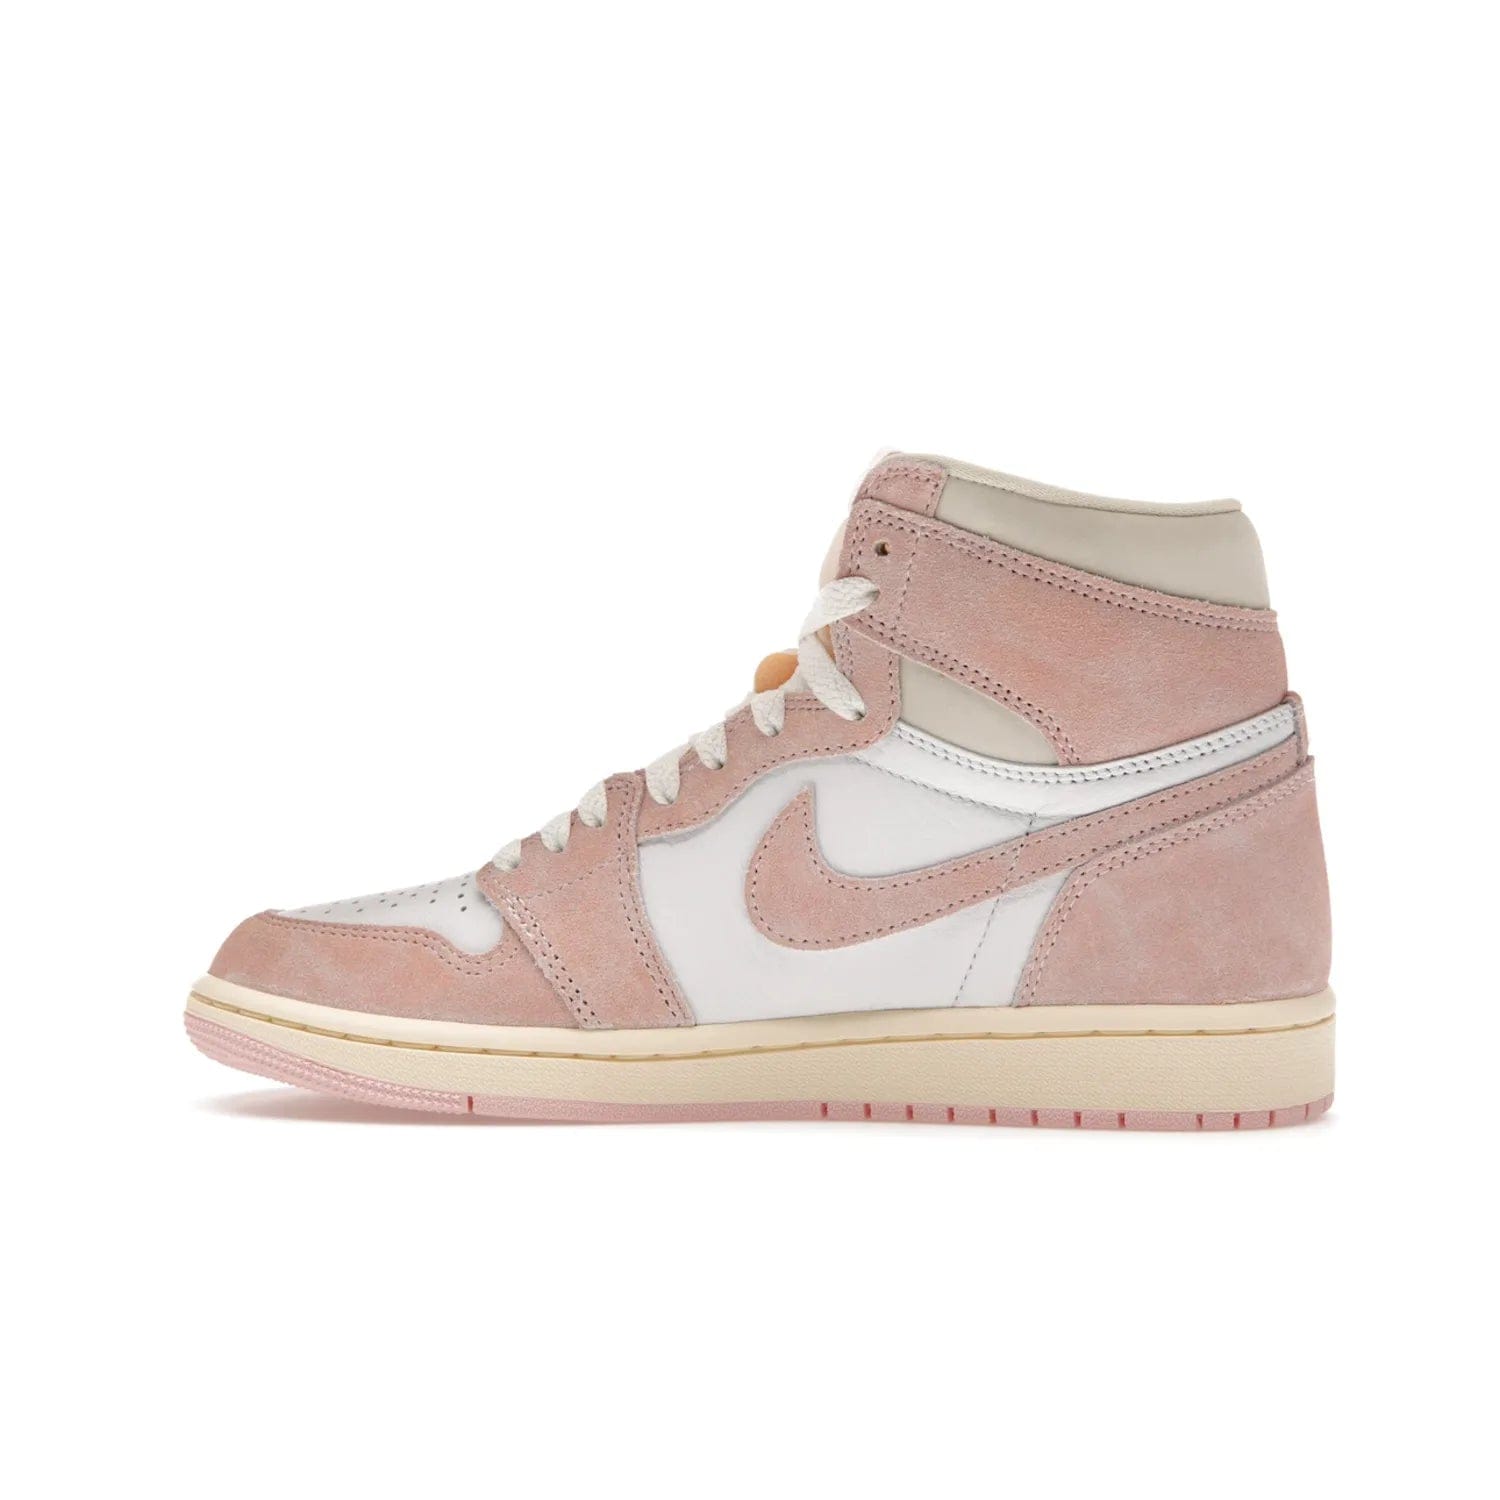 Jordan 1 Retro High OG Washed Pink (Women's) - Image 20 - Only at www.BallersClubKickz.com - Iconic Air Jordan 1 Retro High OG for women with unique pink suede and white leather uppers. Get the timeless look on April 22, 2023.